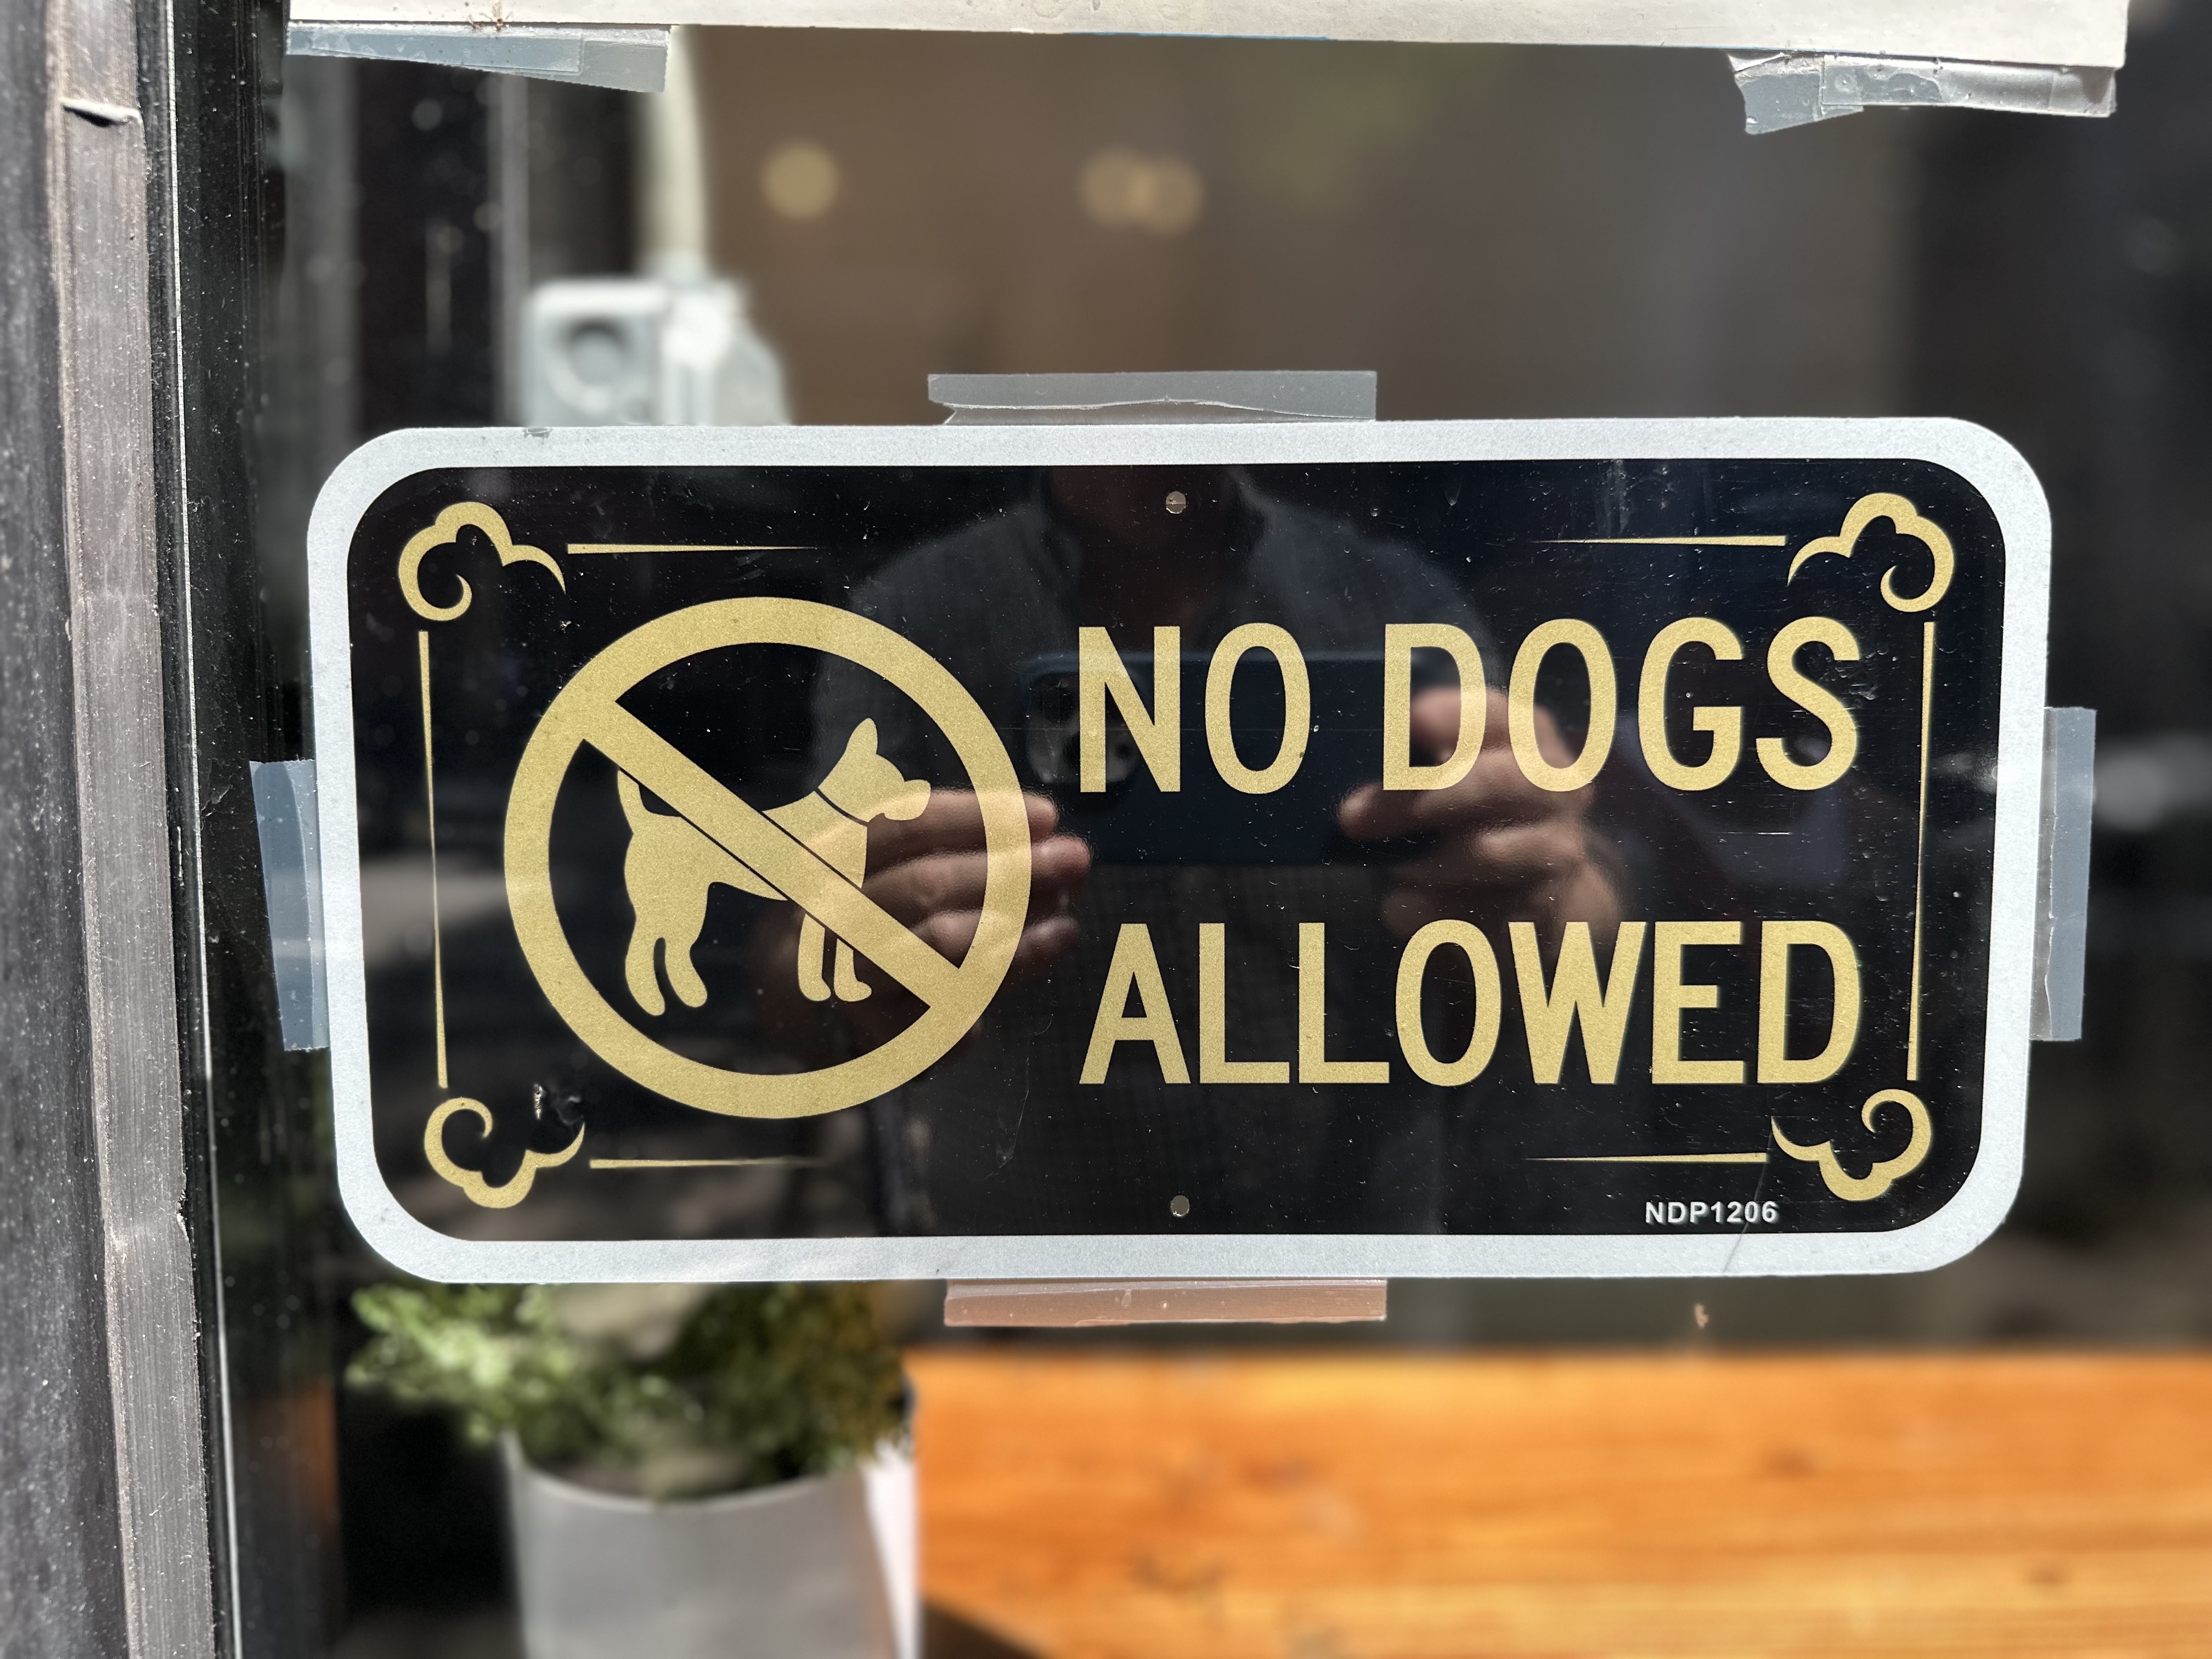 Clearly No Dogs Allowed at this coffee shop on E90th Street. 